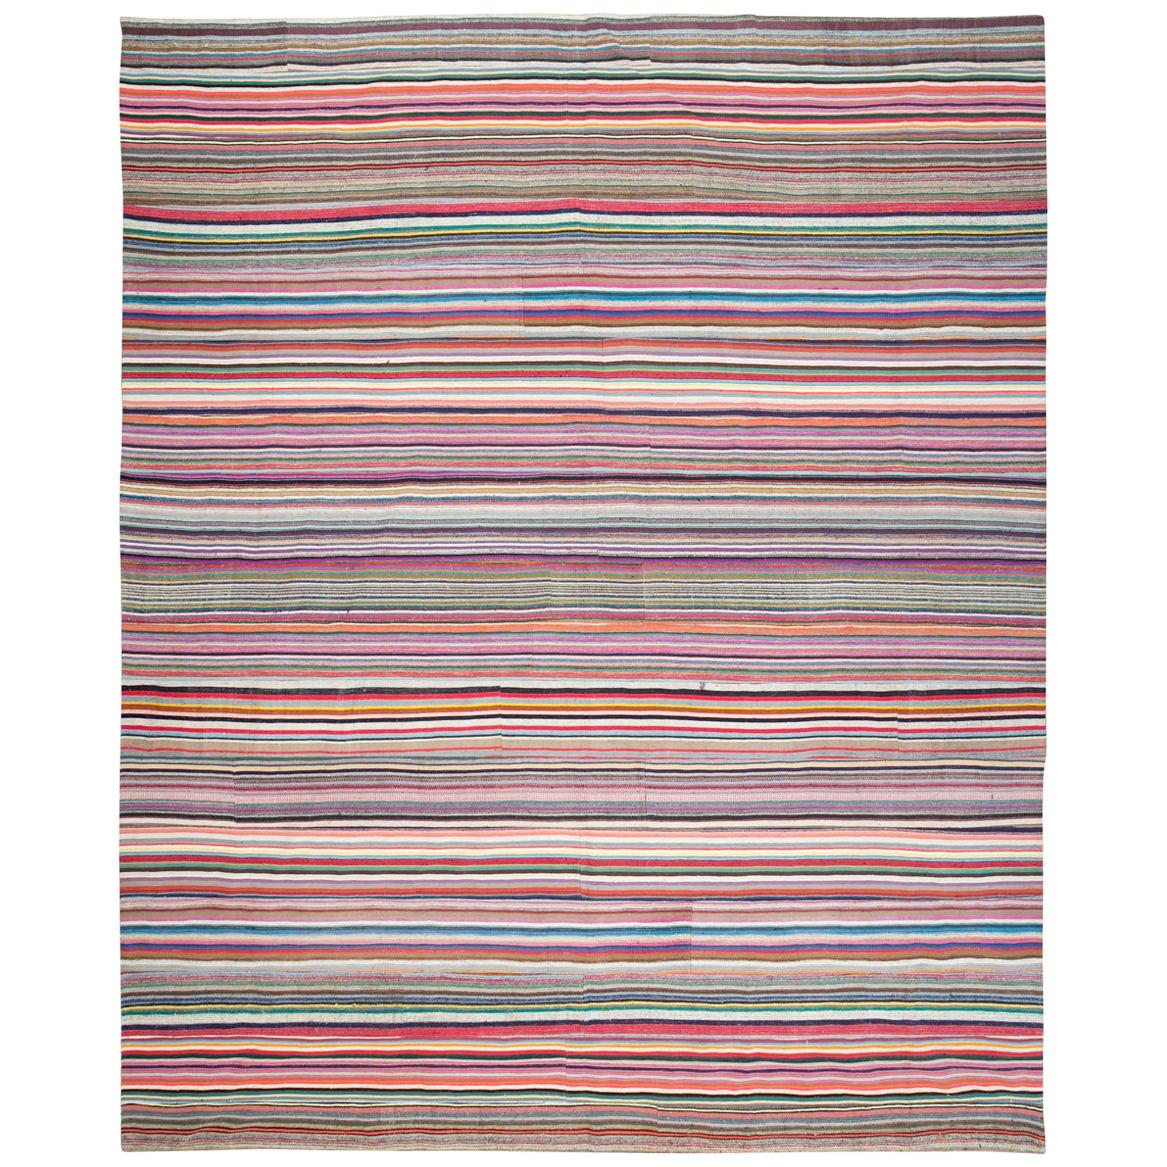 Contemporary Handmade Colorful Turkish Oversize Square Flat-Weave Rug